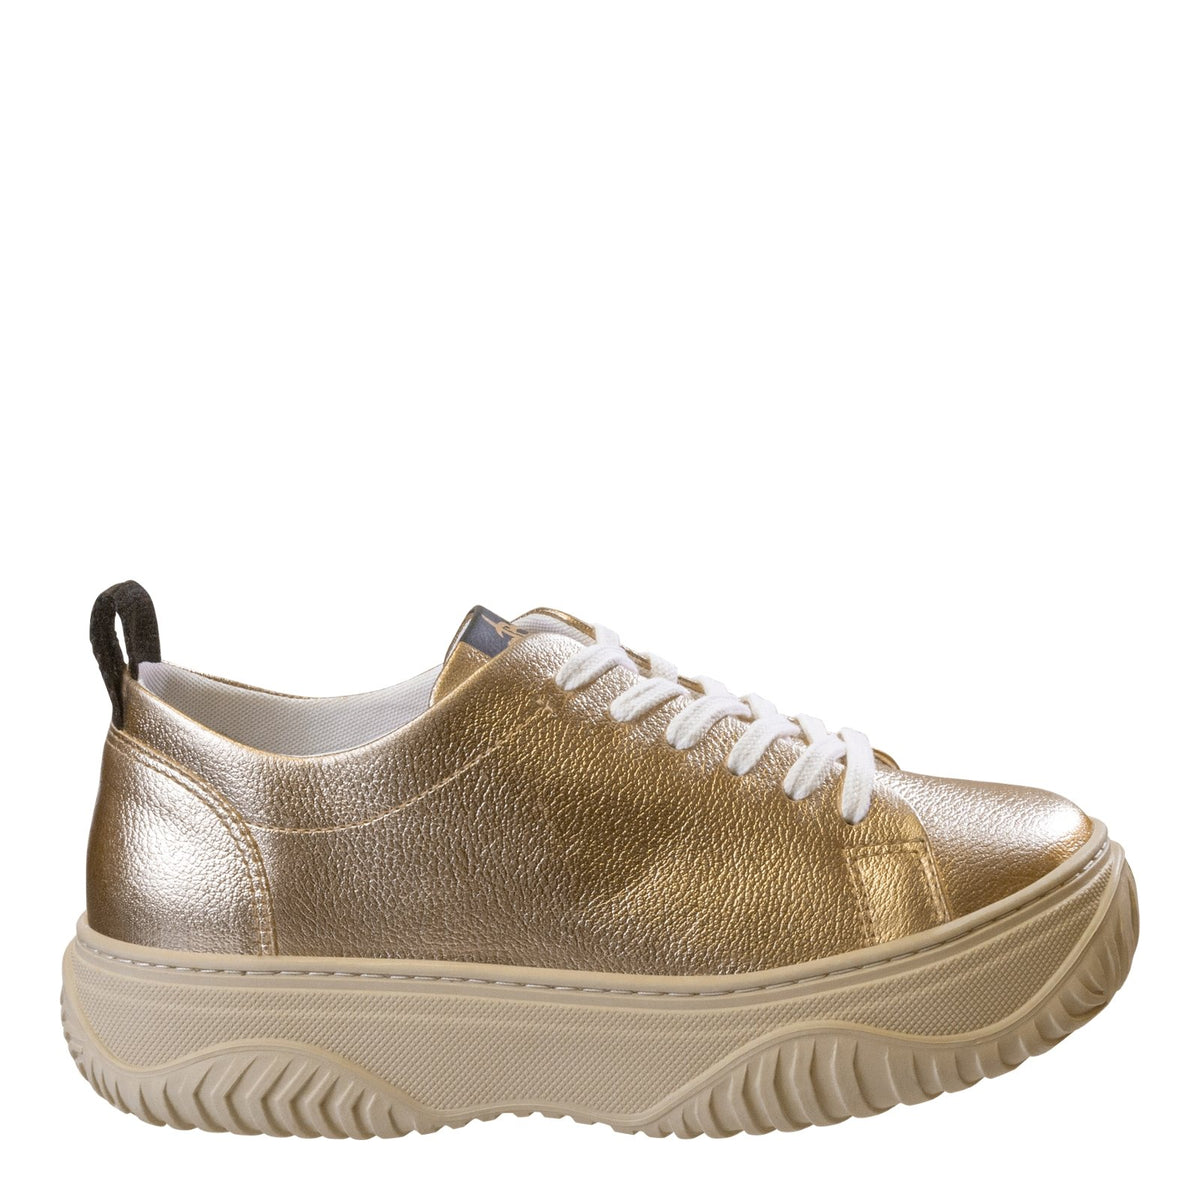 OTBT - PANGEA in GOLD Court Sneakers - J. Cole Shoes